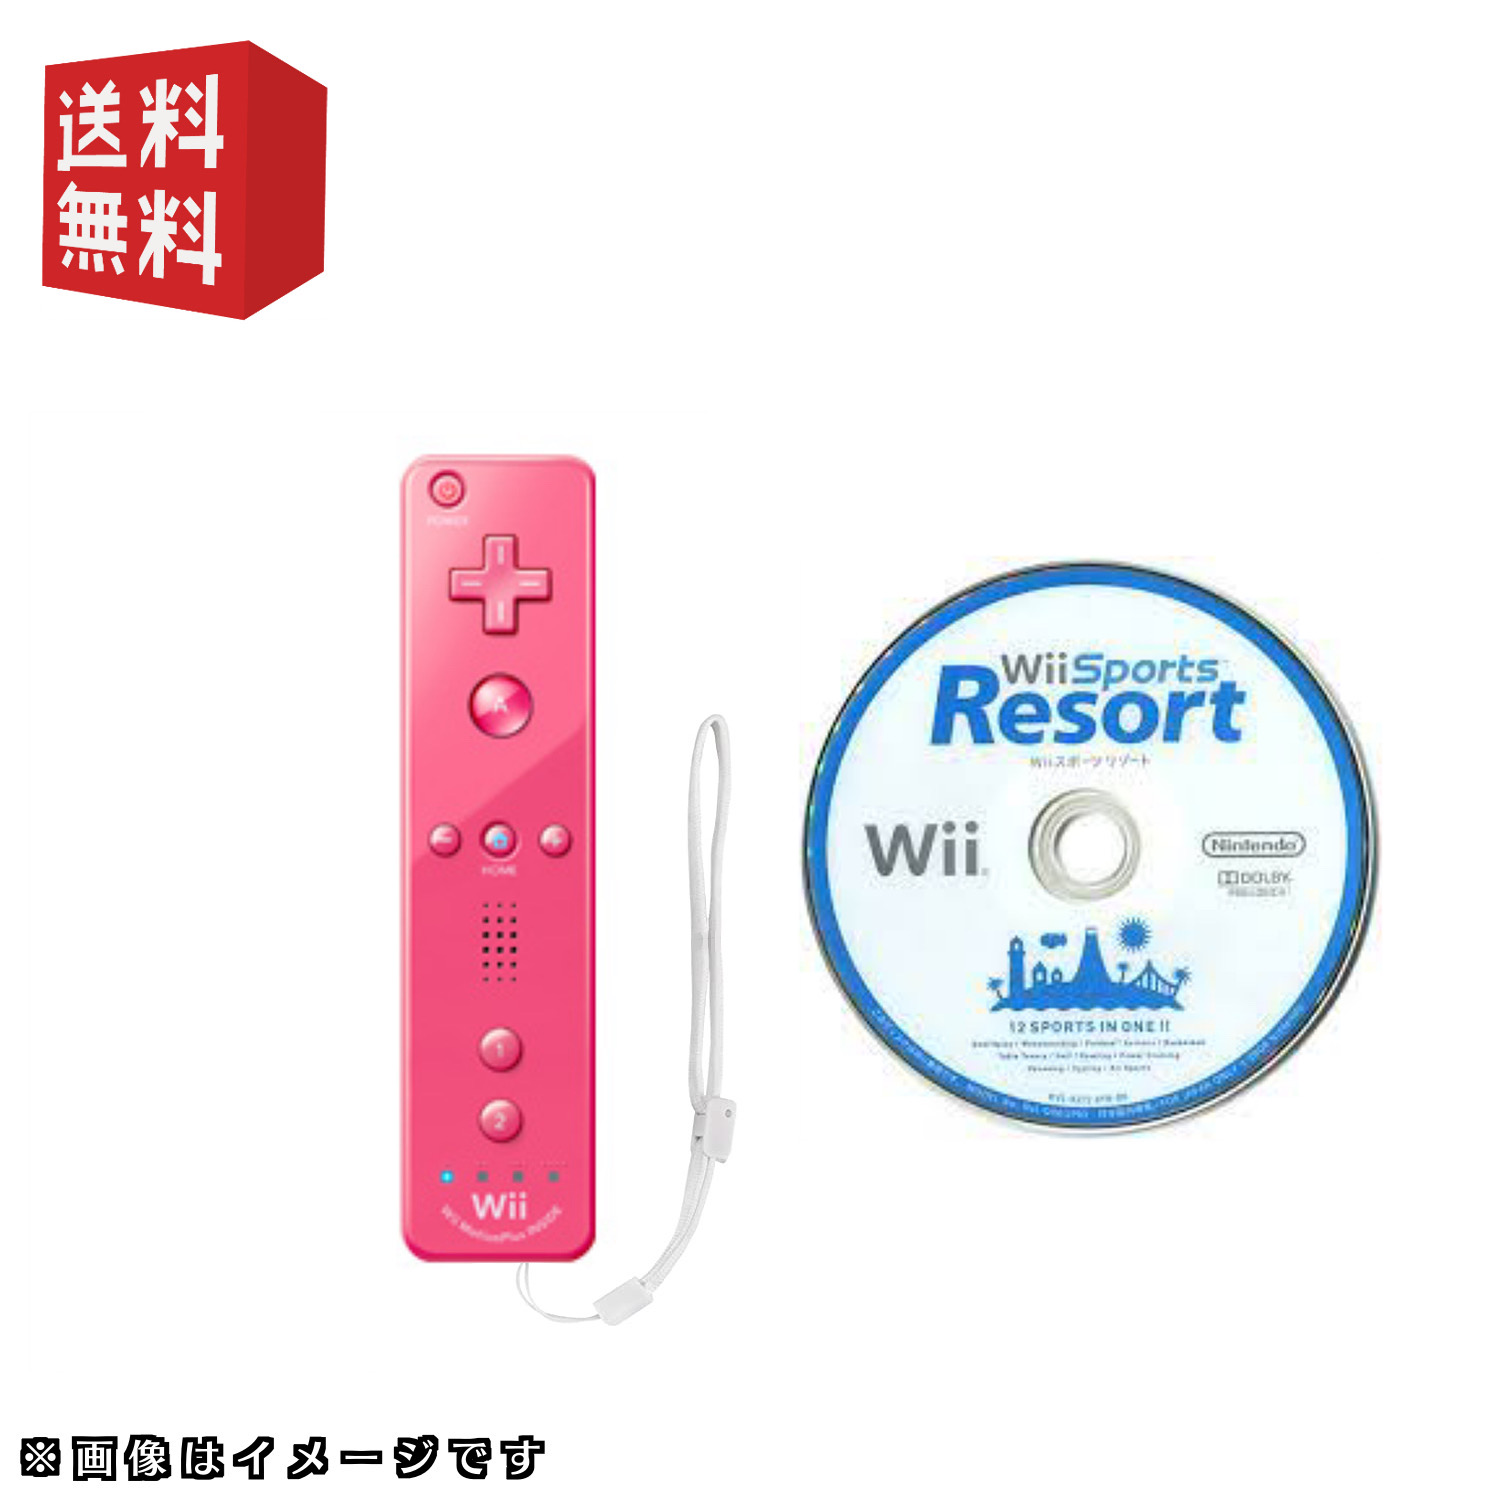 wiiソフト「wii スポーツリゾート」＋ wiiリモコンプラス セット